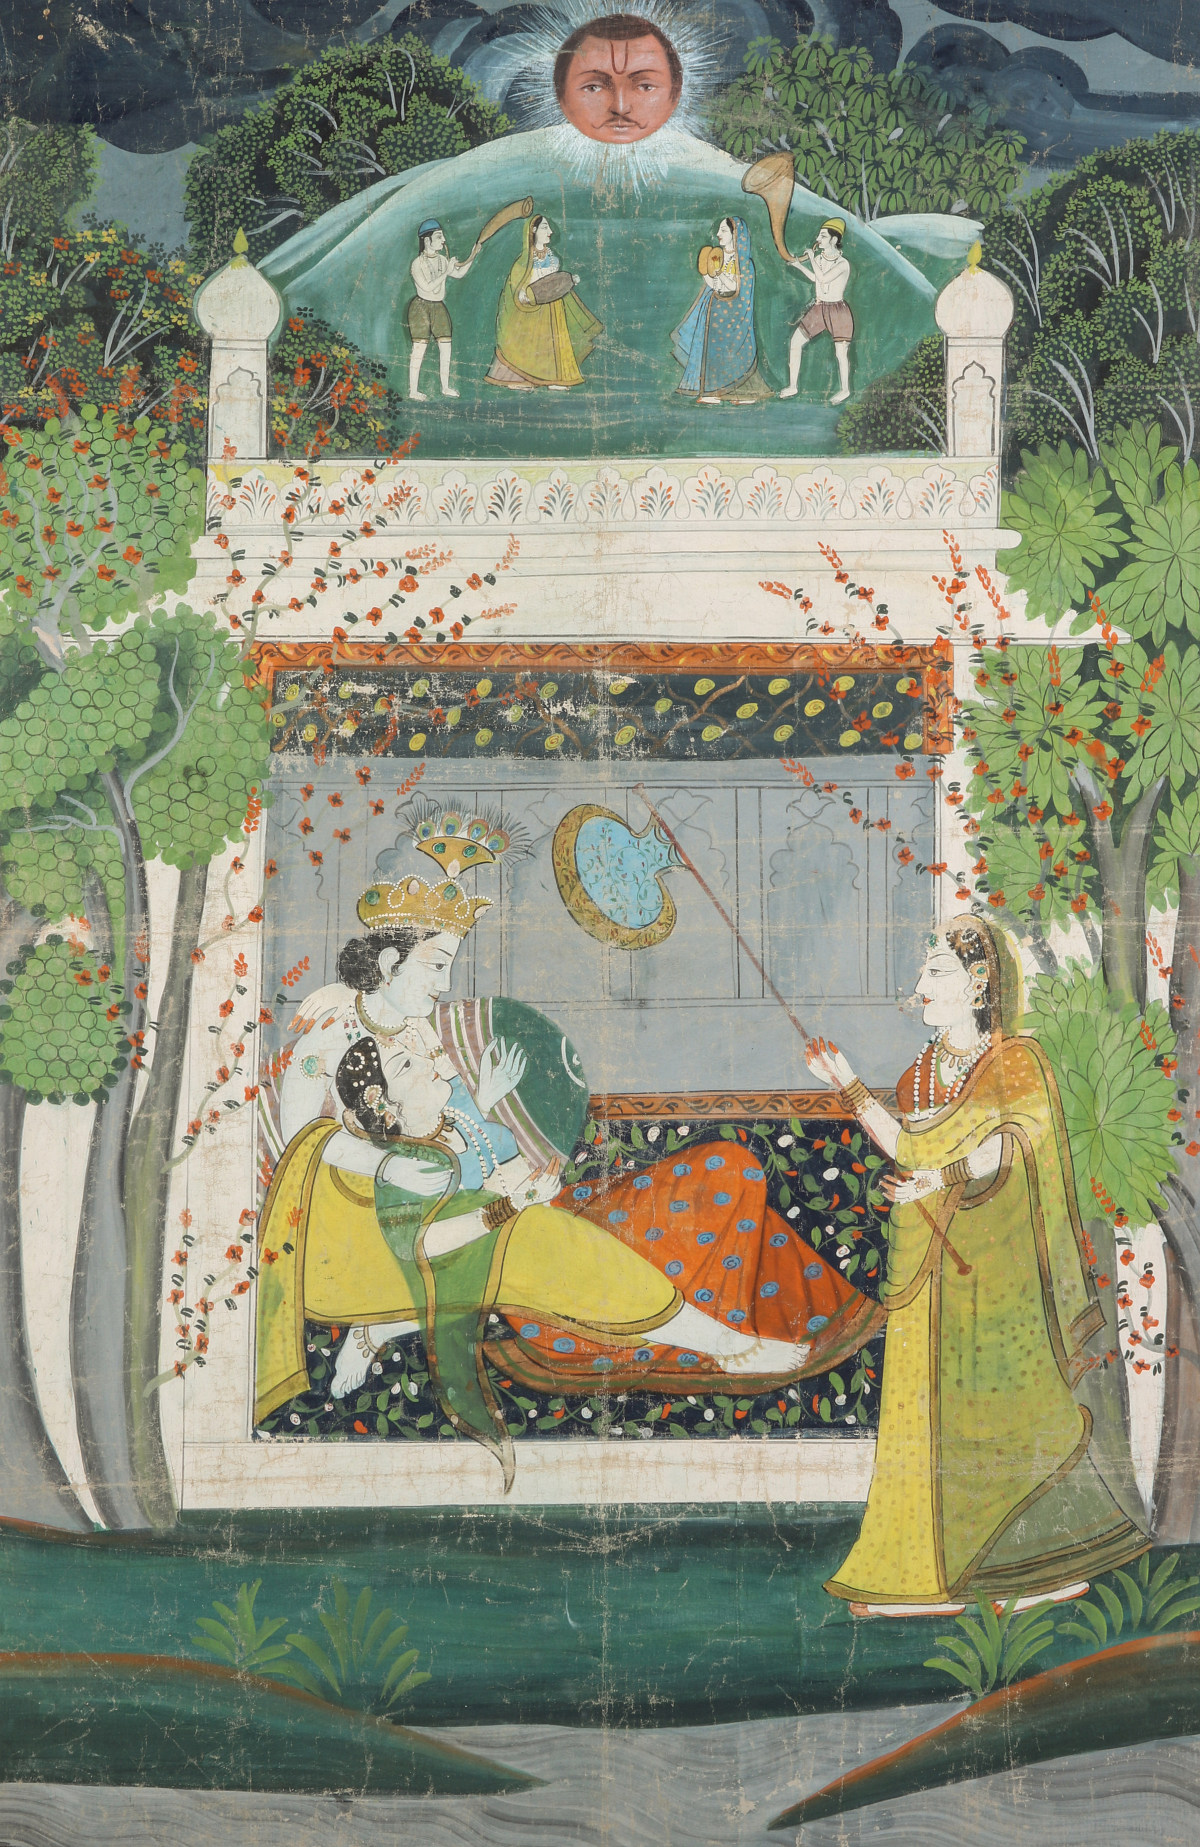 AN 18TH / 19TH CENTURY INDIAN MUGHAL PAINTING